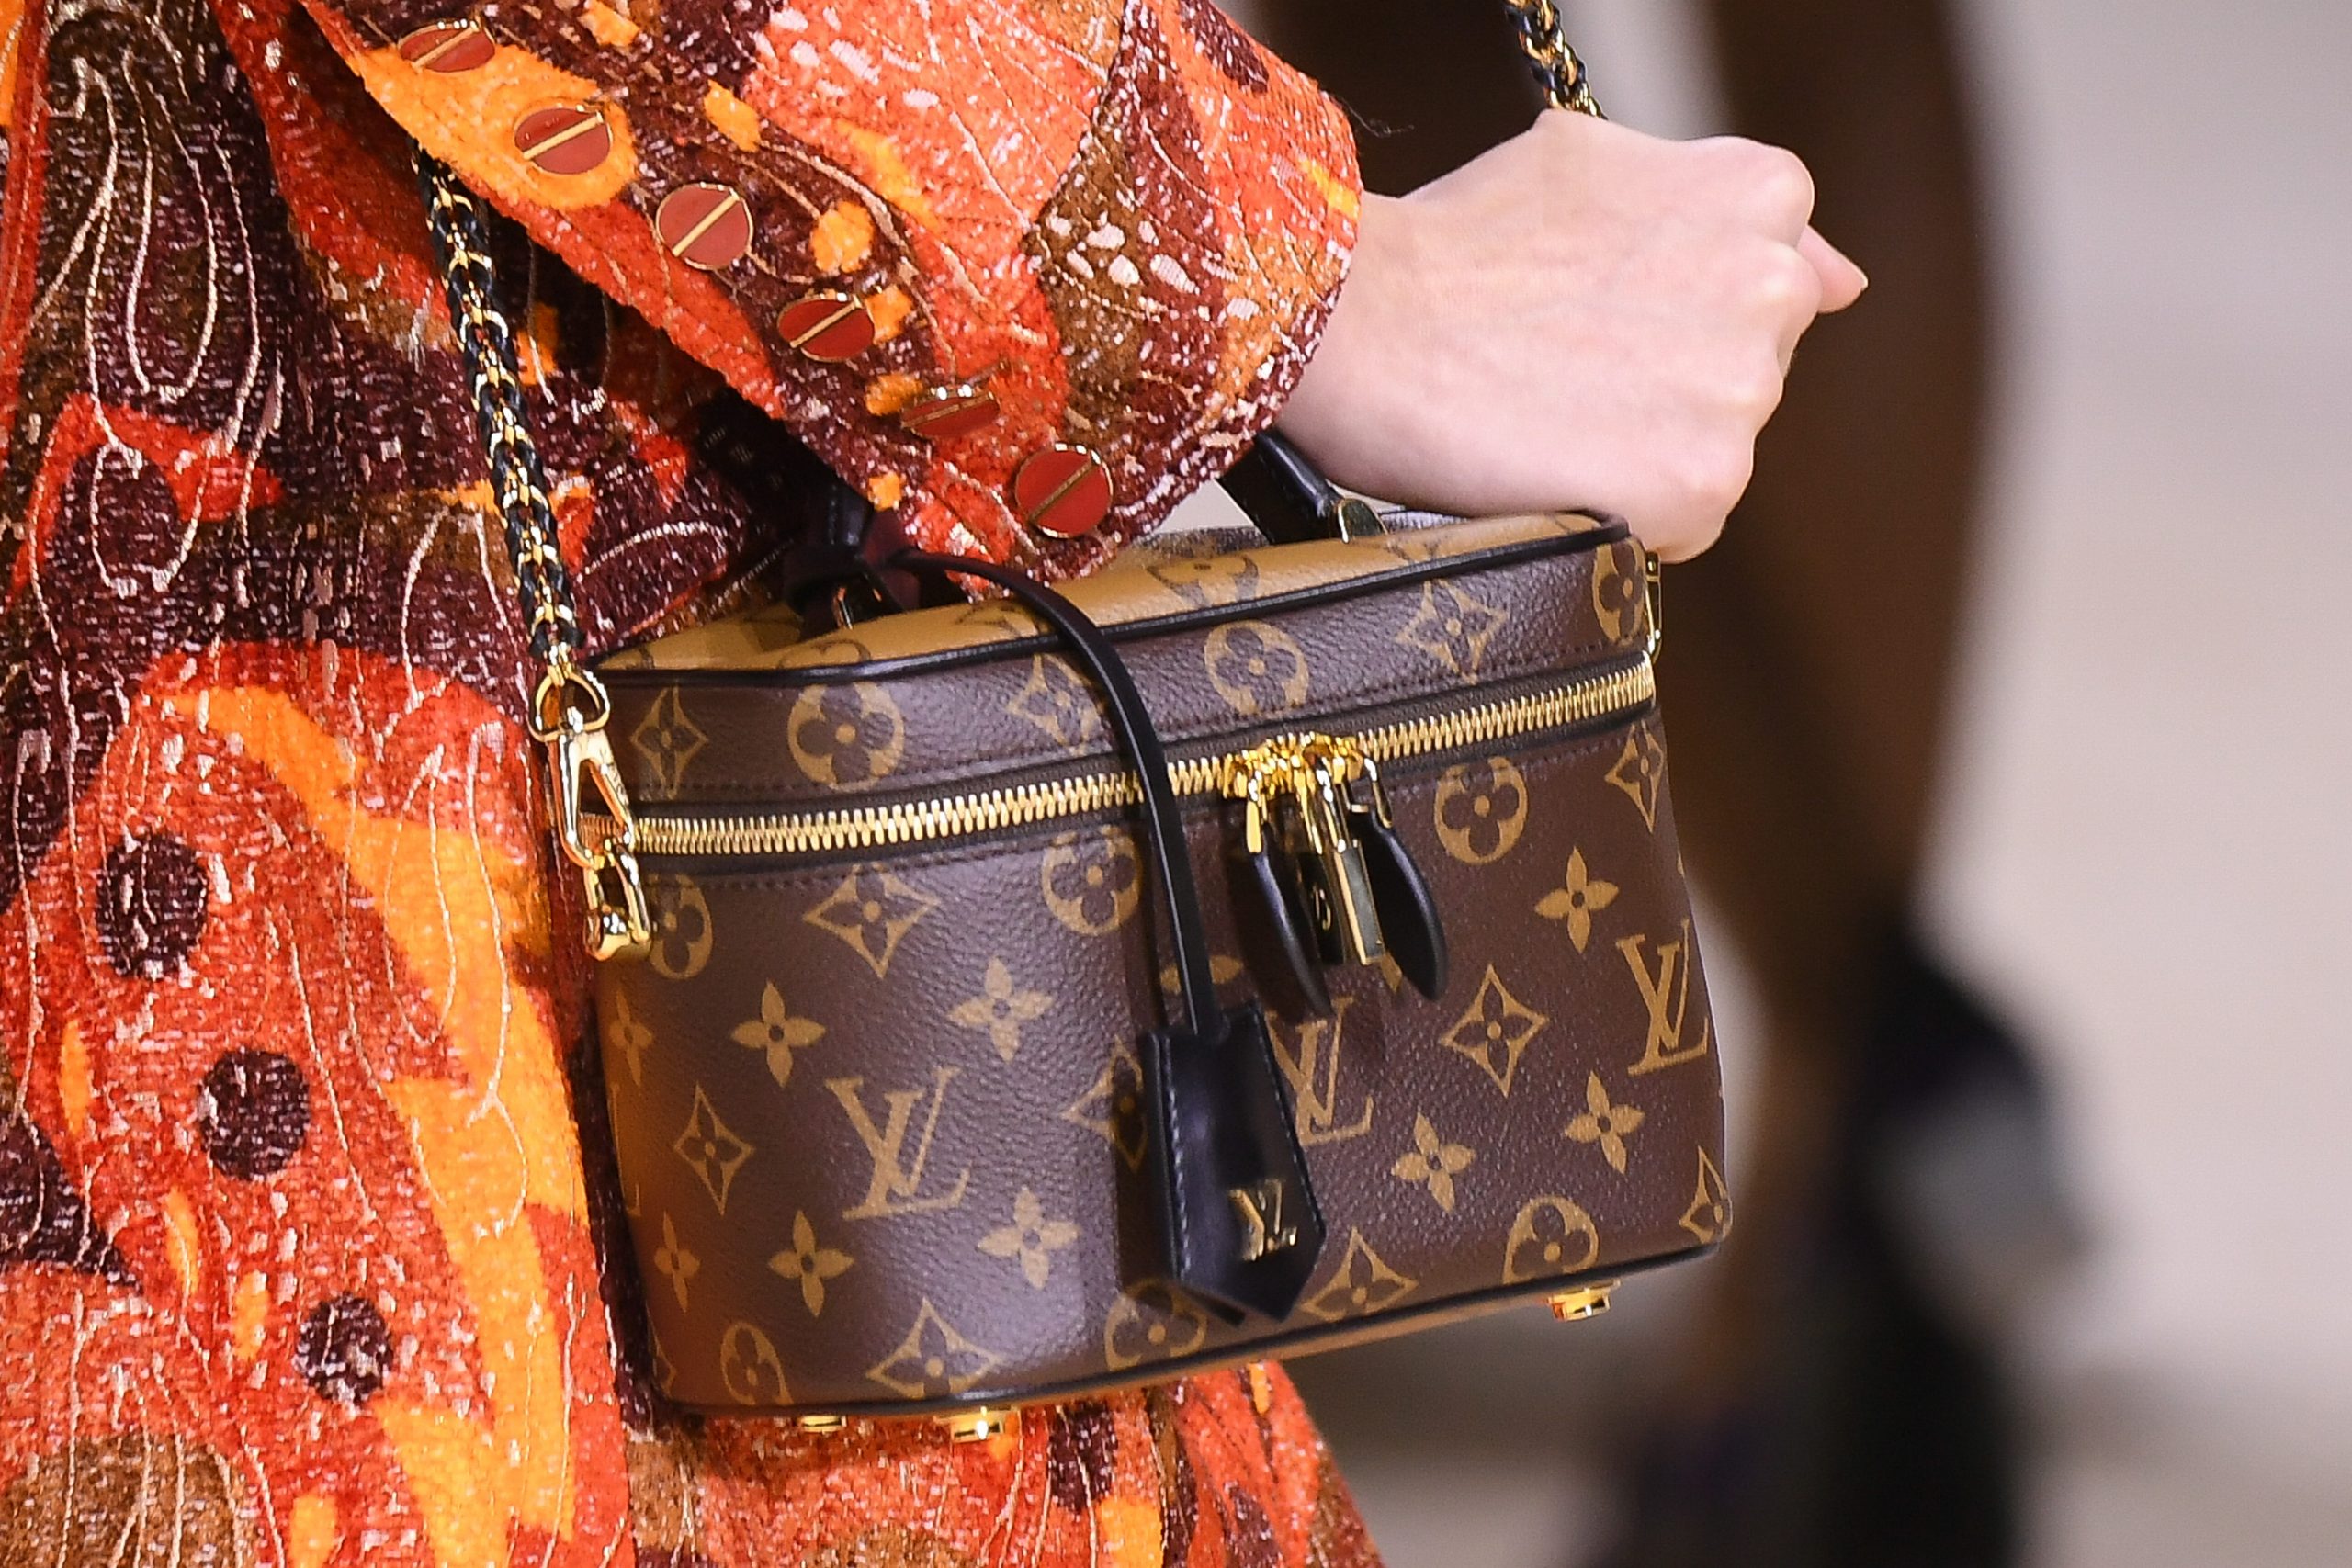 Fremragende indsats Interpretive Discounted Louis Vuitton bags exist! Here's how to find one | Woman & Home